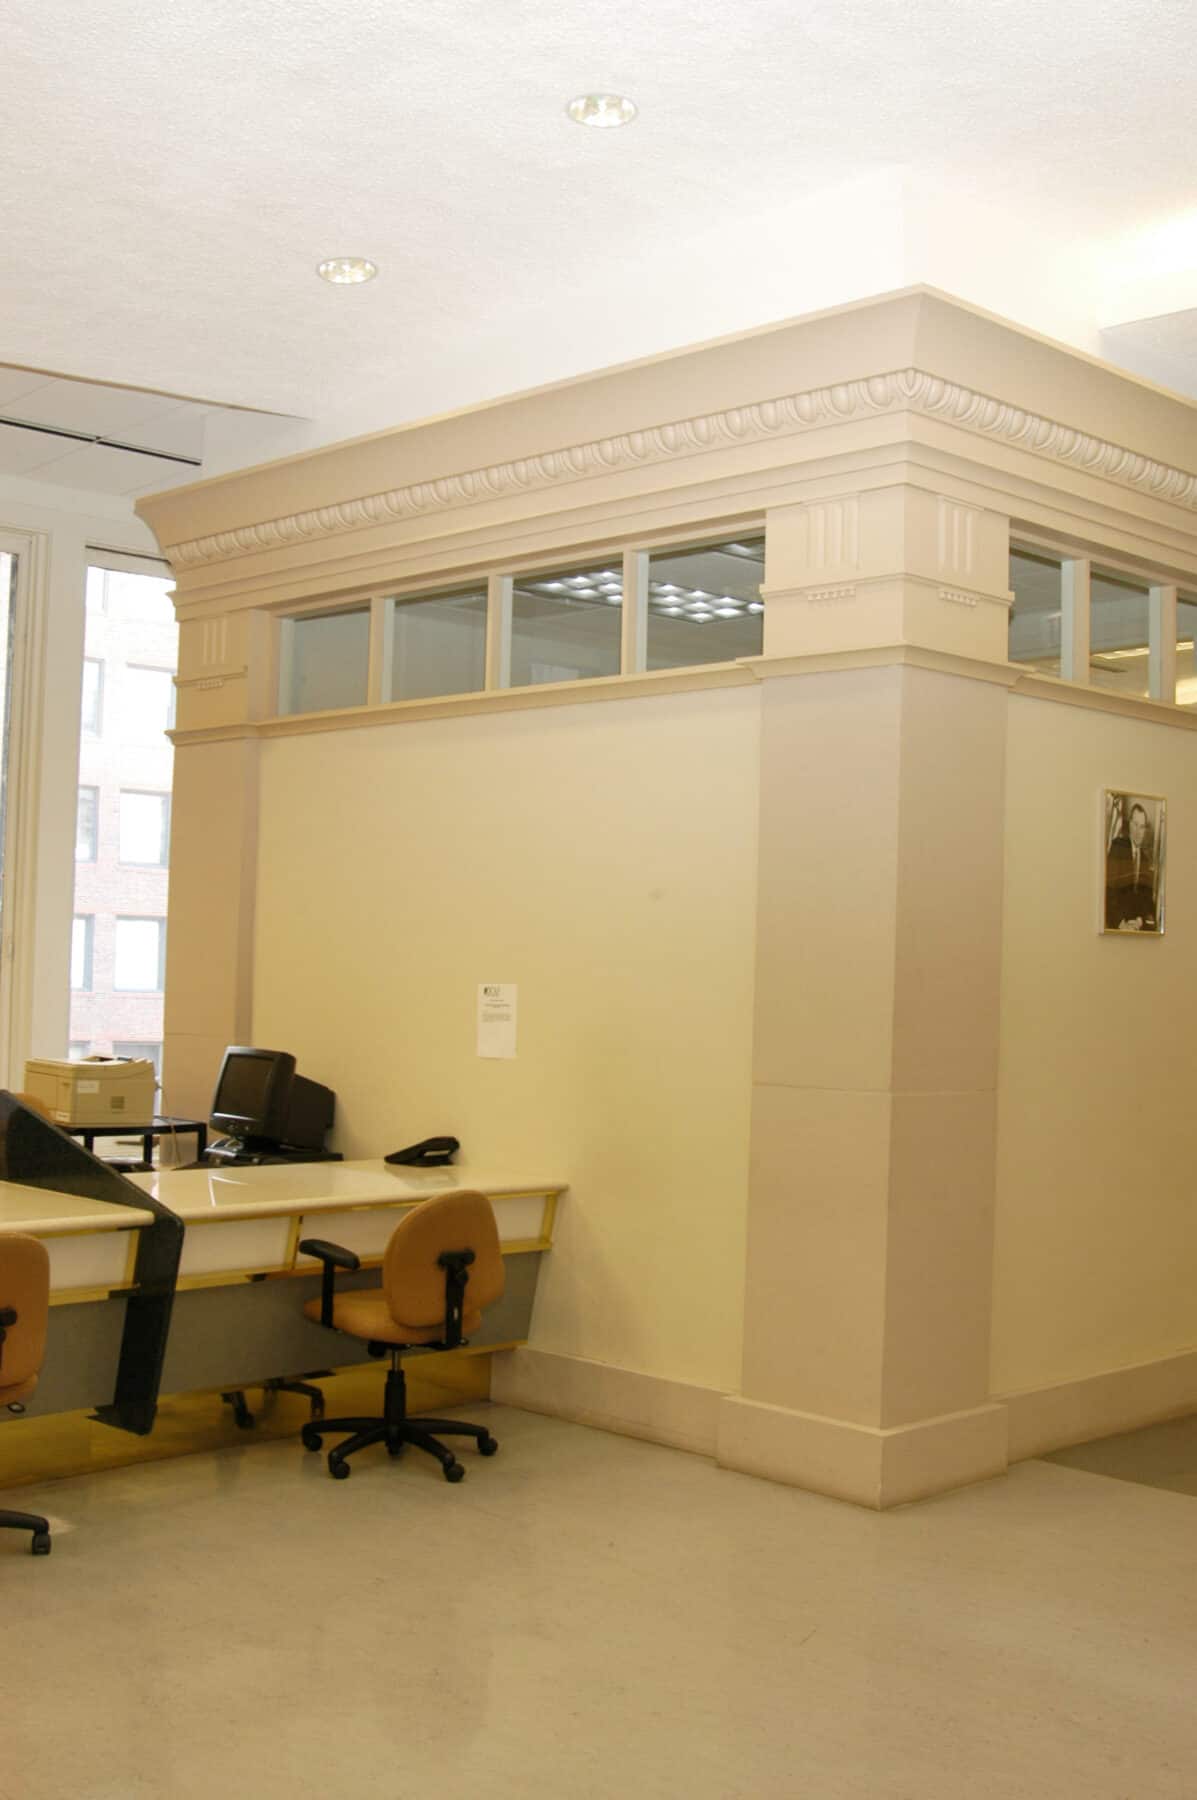 Custom Fabrication & Custom Woodworking. Specialty Contractors S&E Design Build Featured Project: Chicago City Hall Custom Millwork